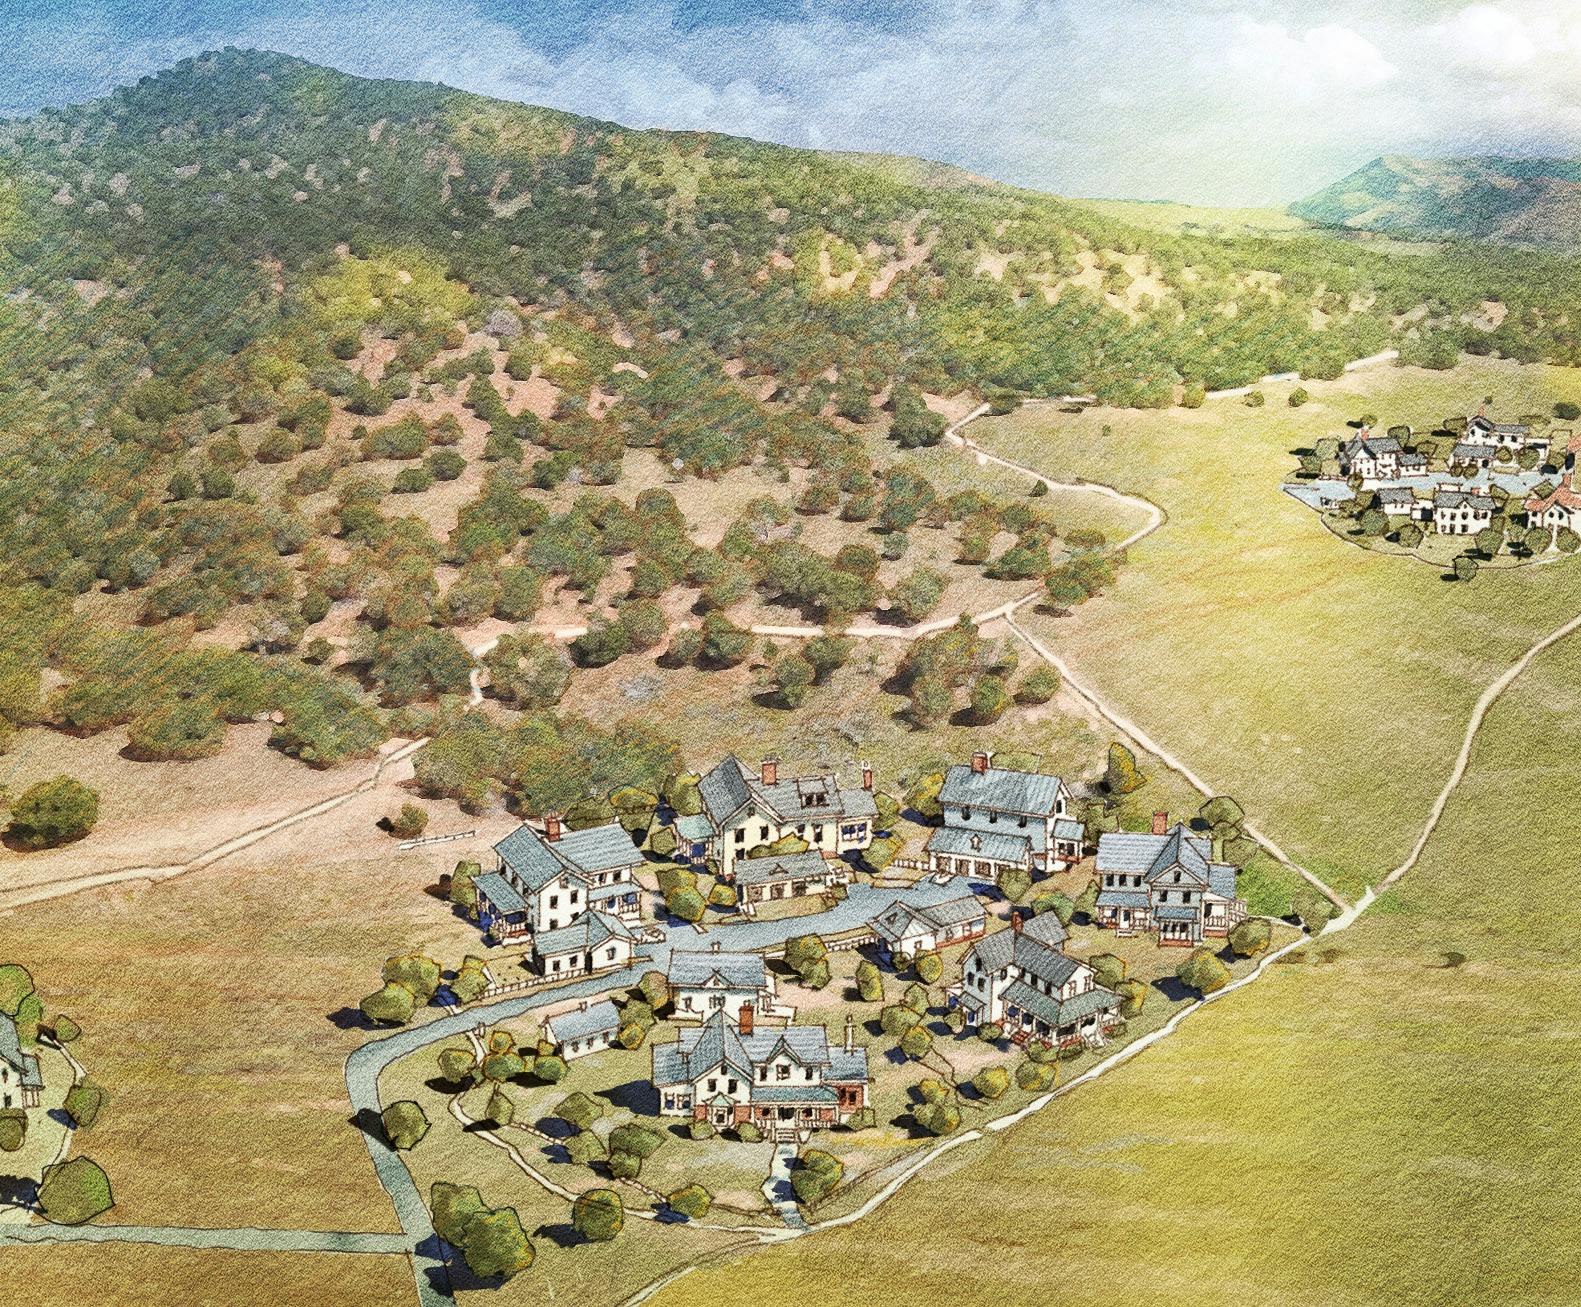 cedar crest village location with homes in cluster sites